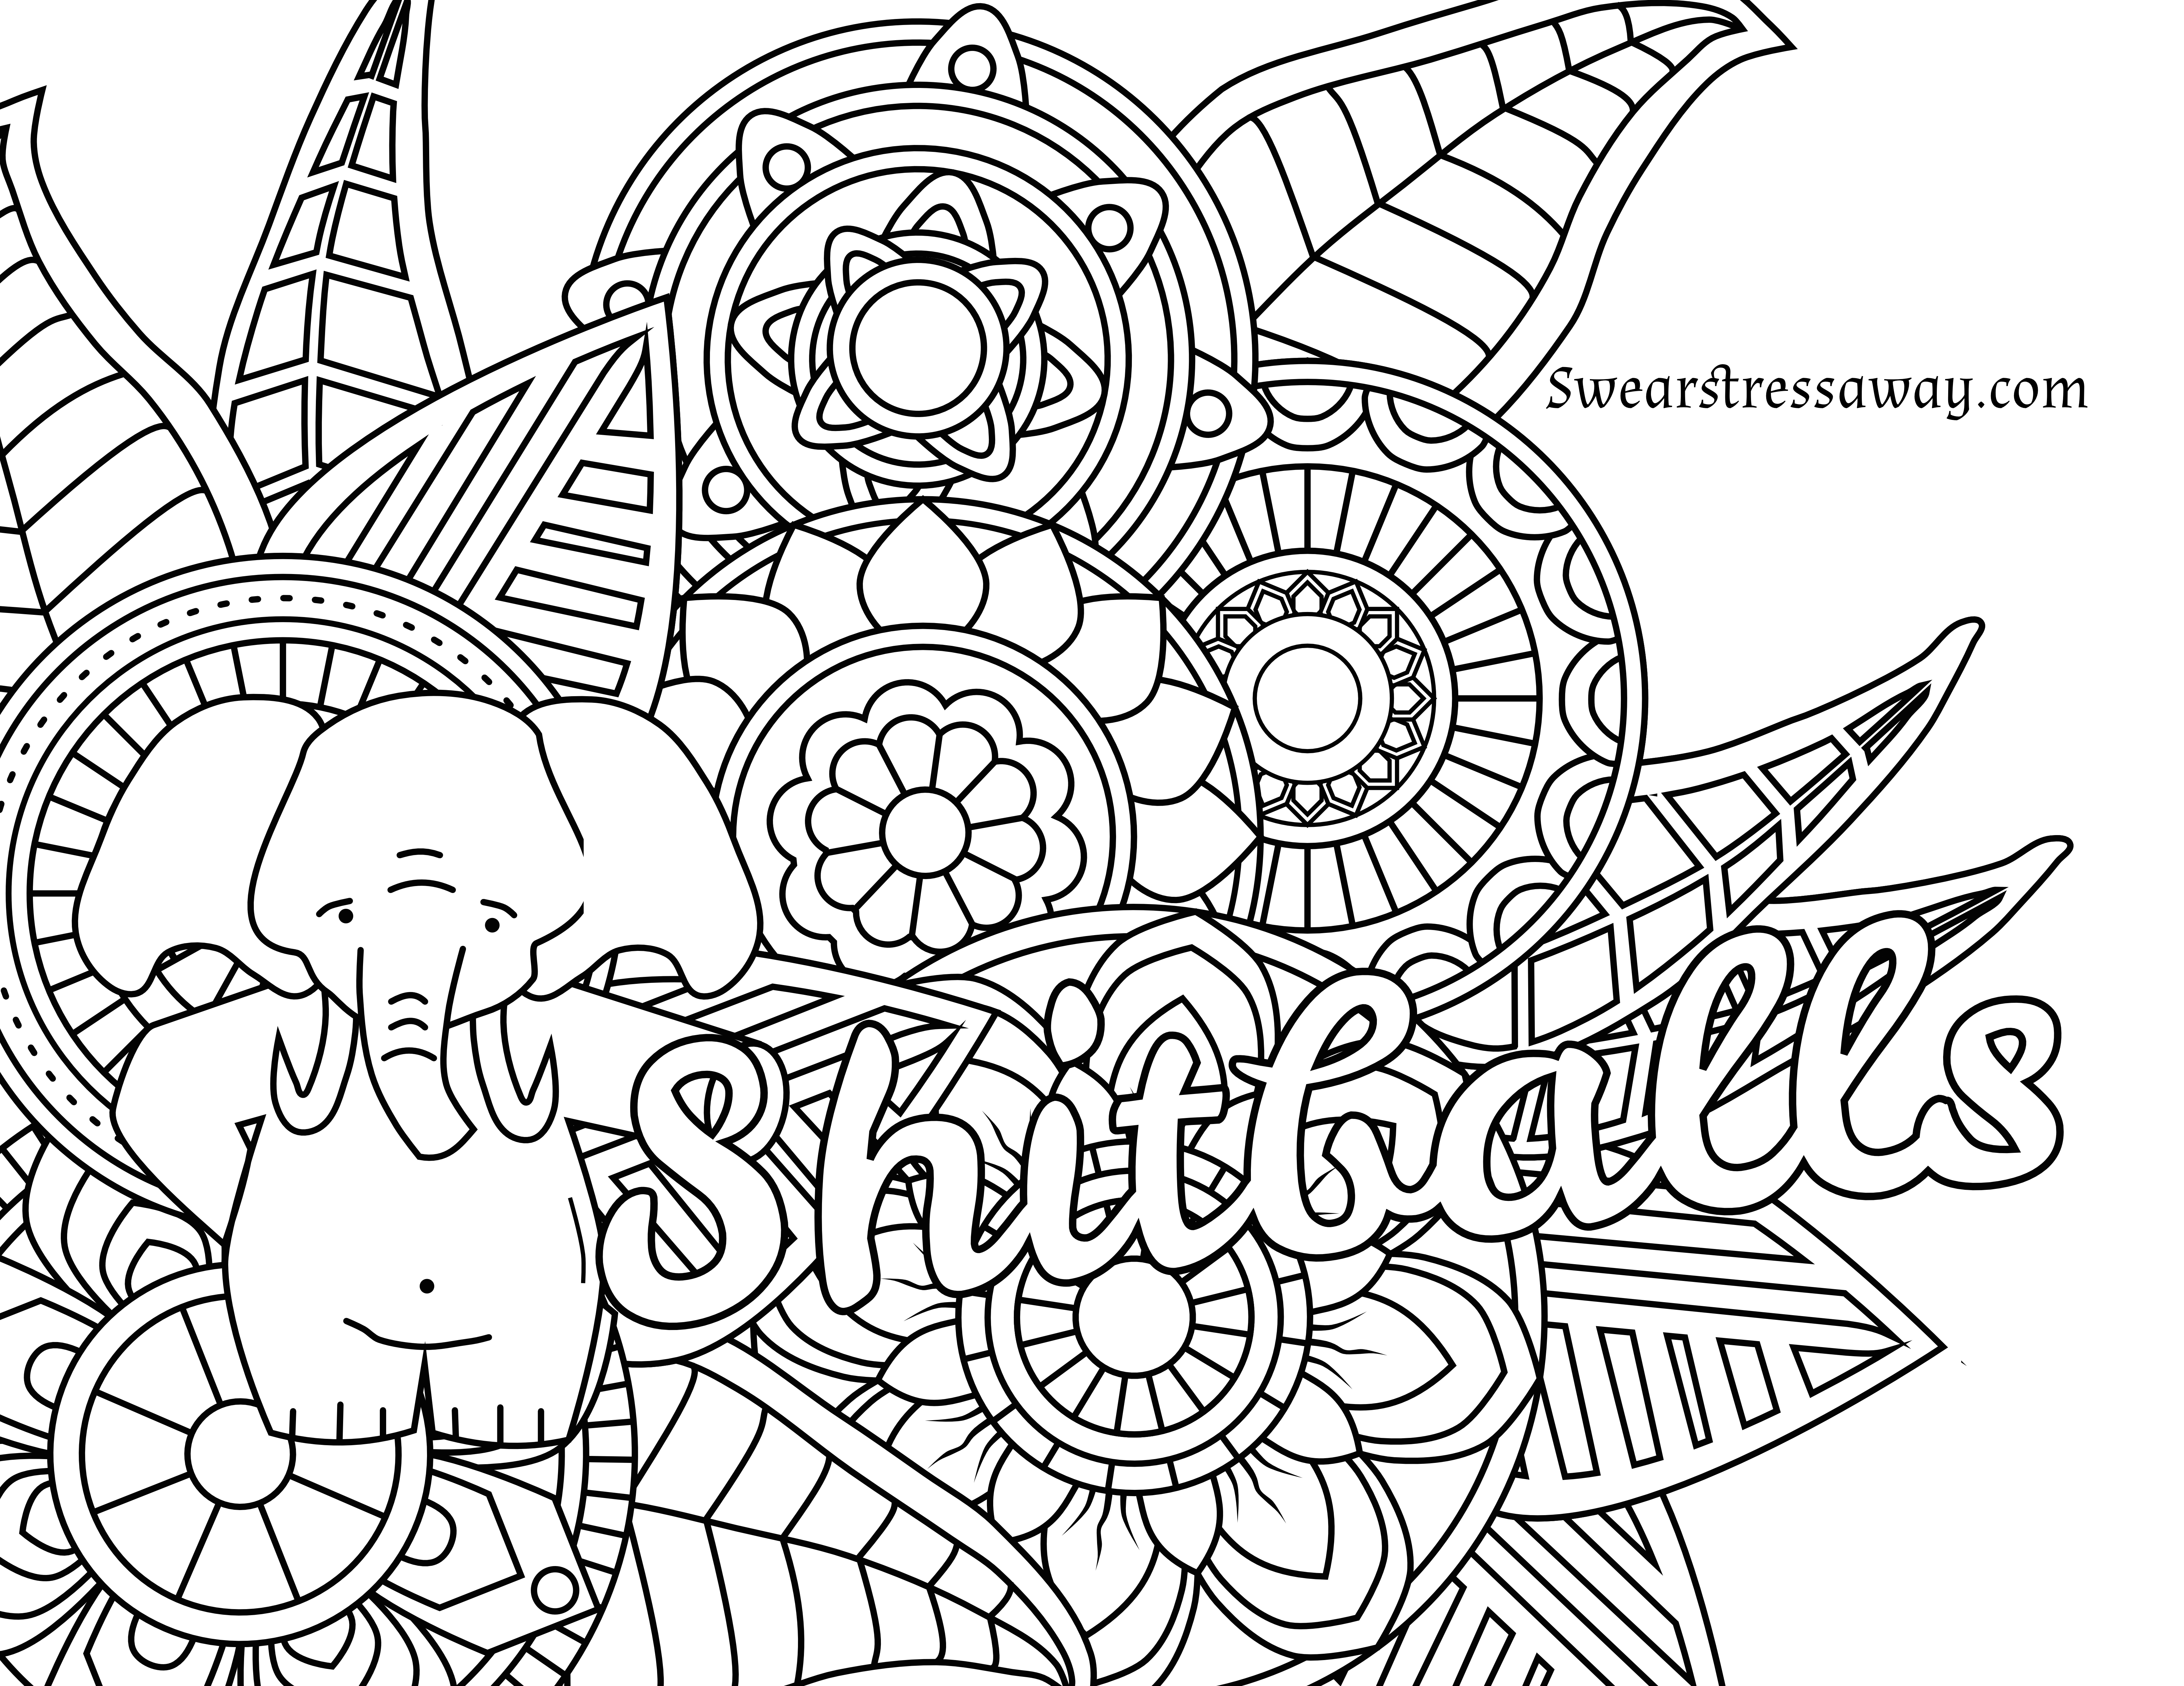 Coloring Pages : Free Printable Coloring Pages Adults Quotes For - Free Printable Coloring Pages For Adults